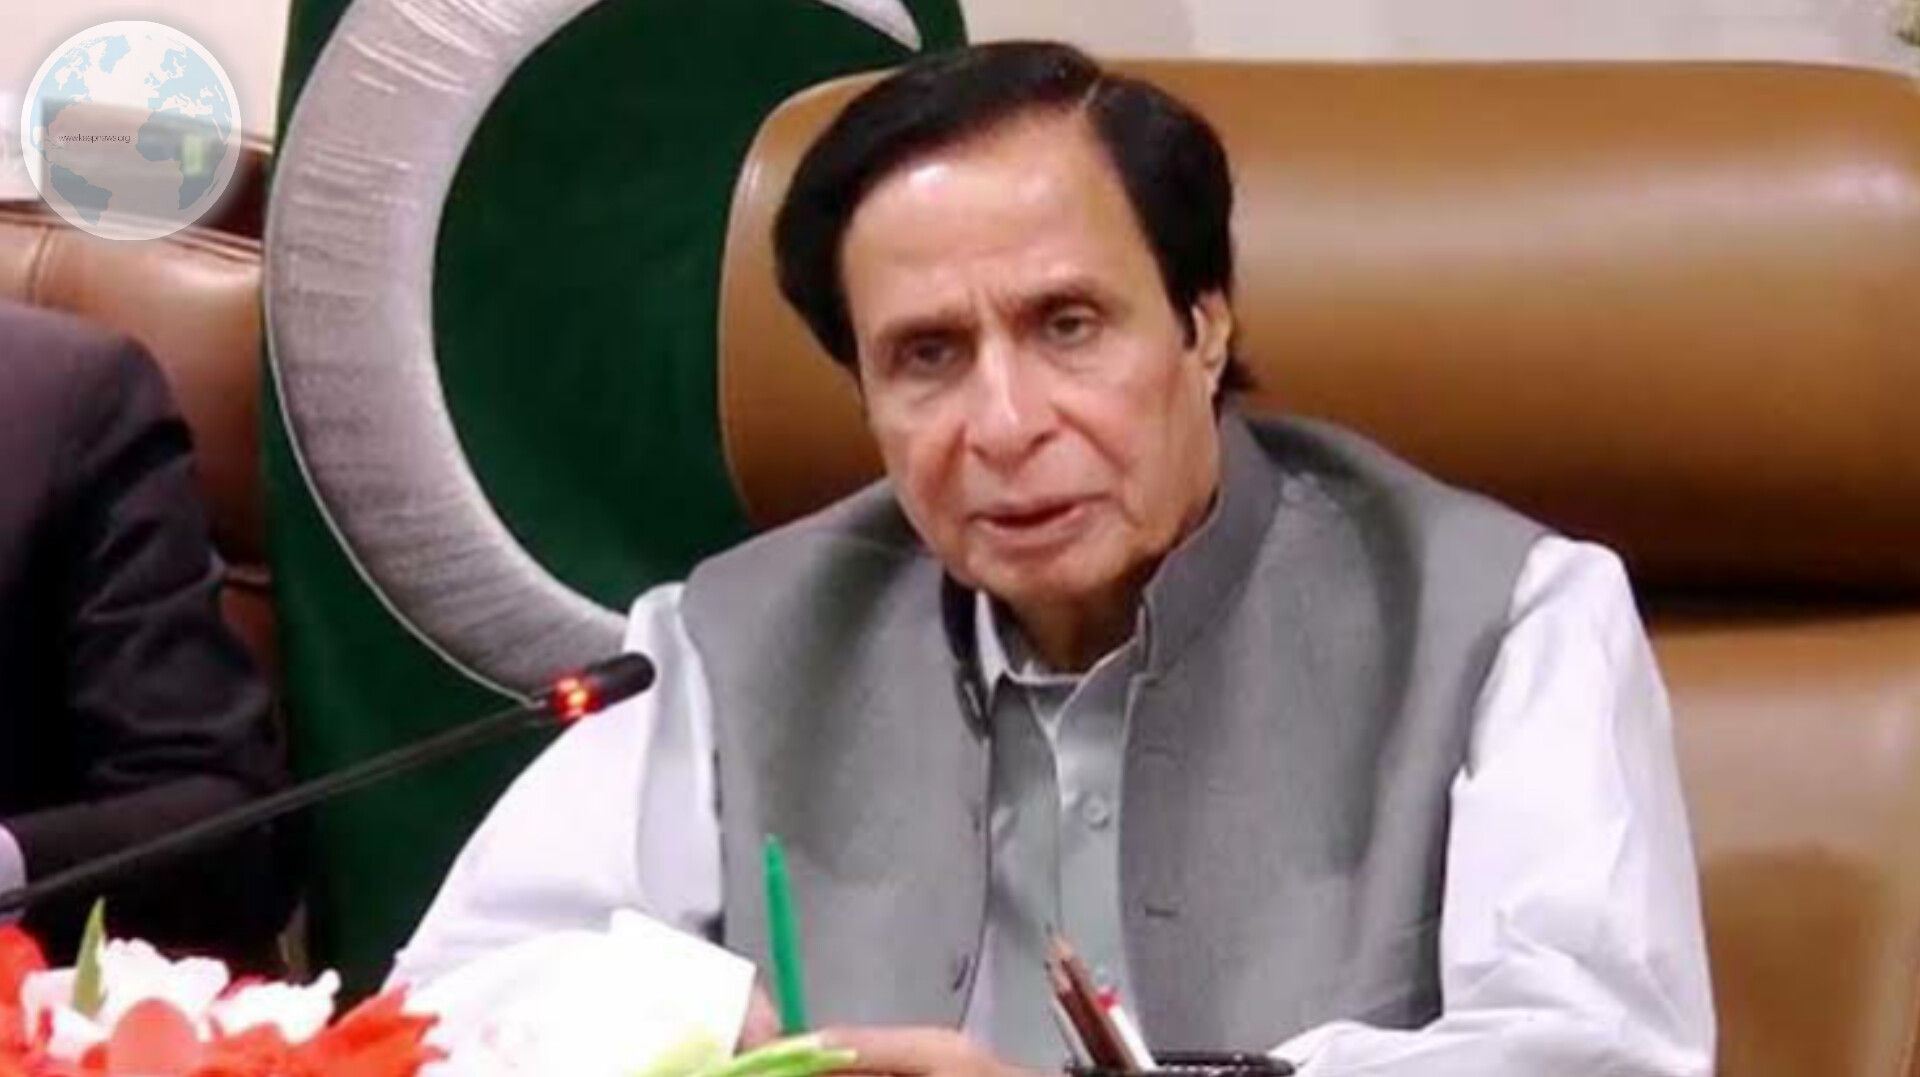 Pervaiz Elahi has not Yet been Able to Get a Vote of Confidence and he has not been Removed from Position